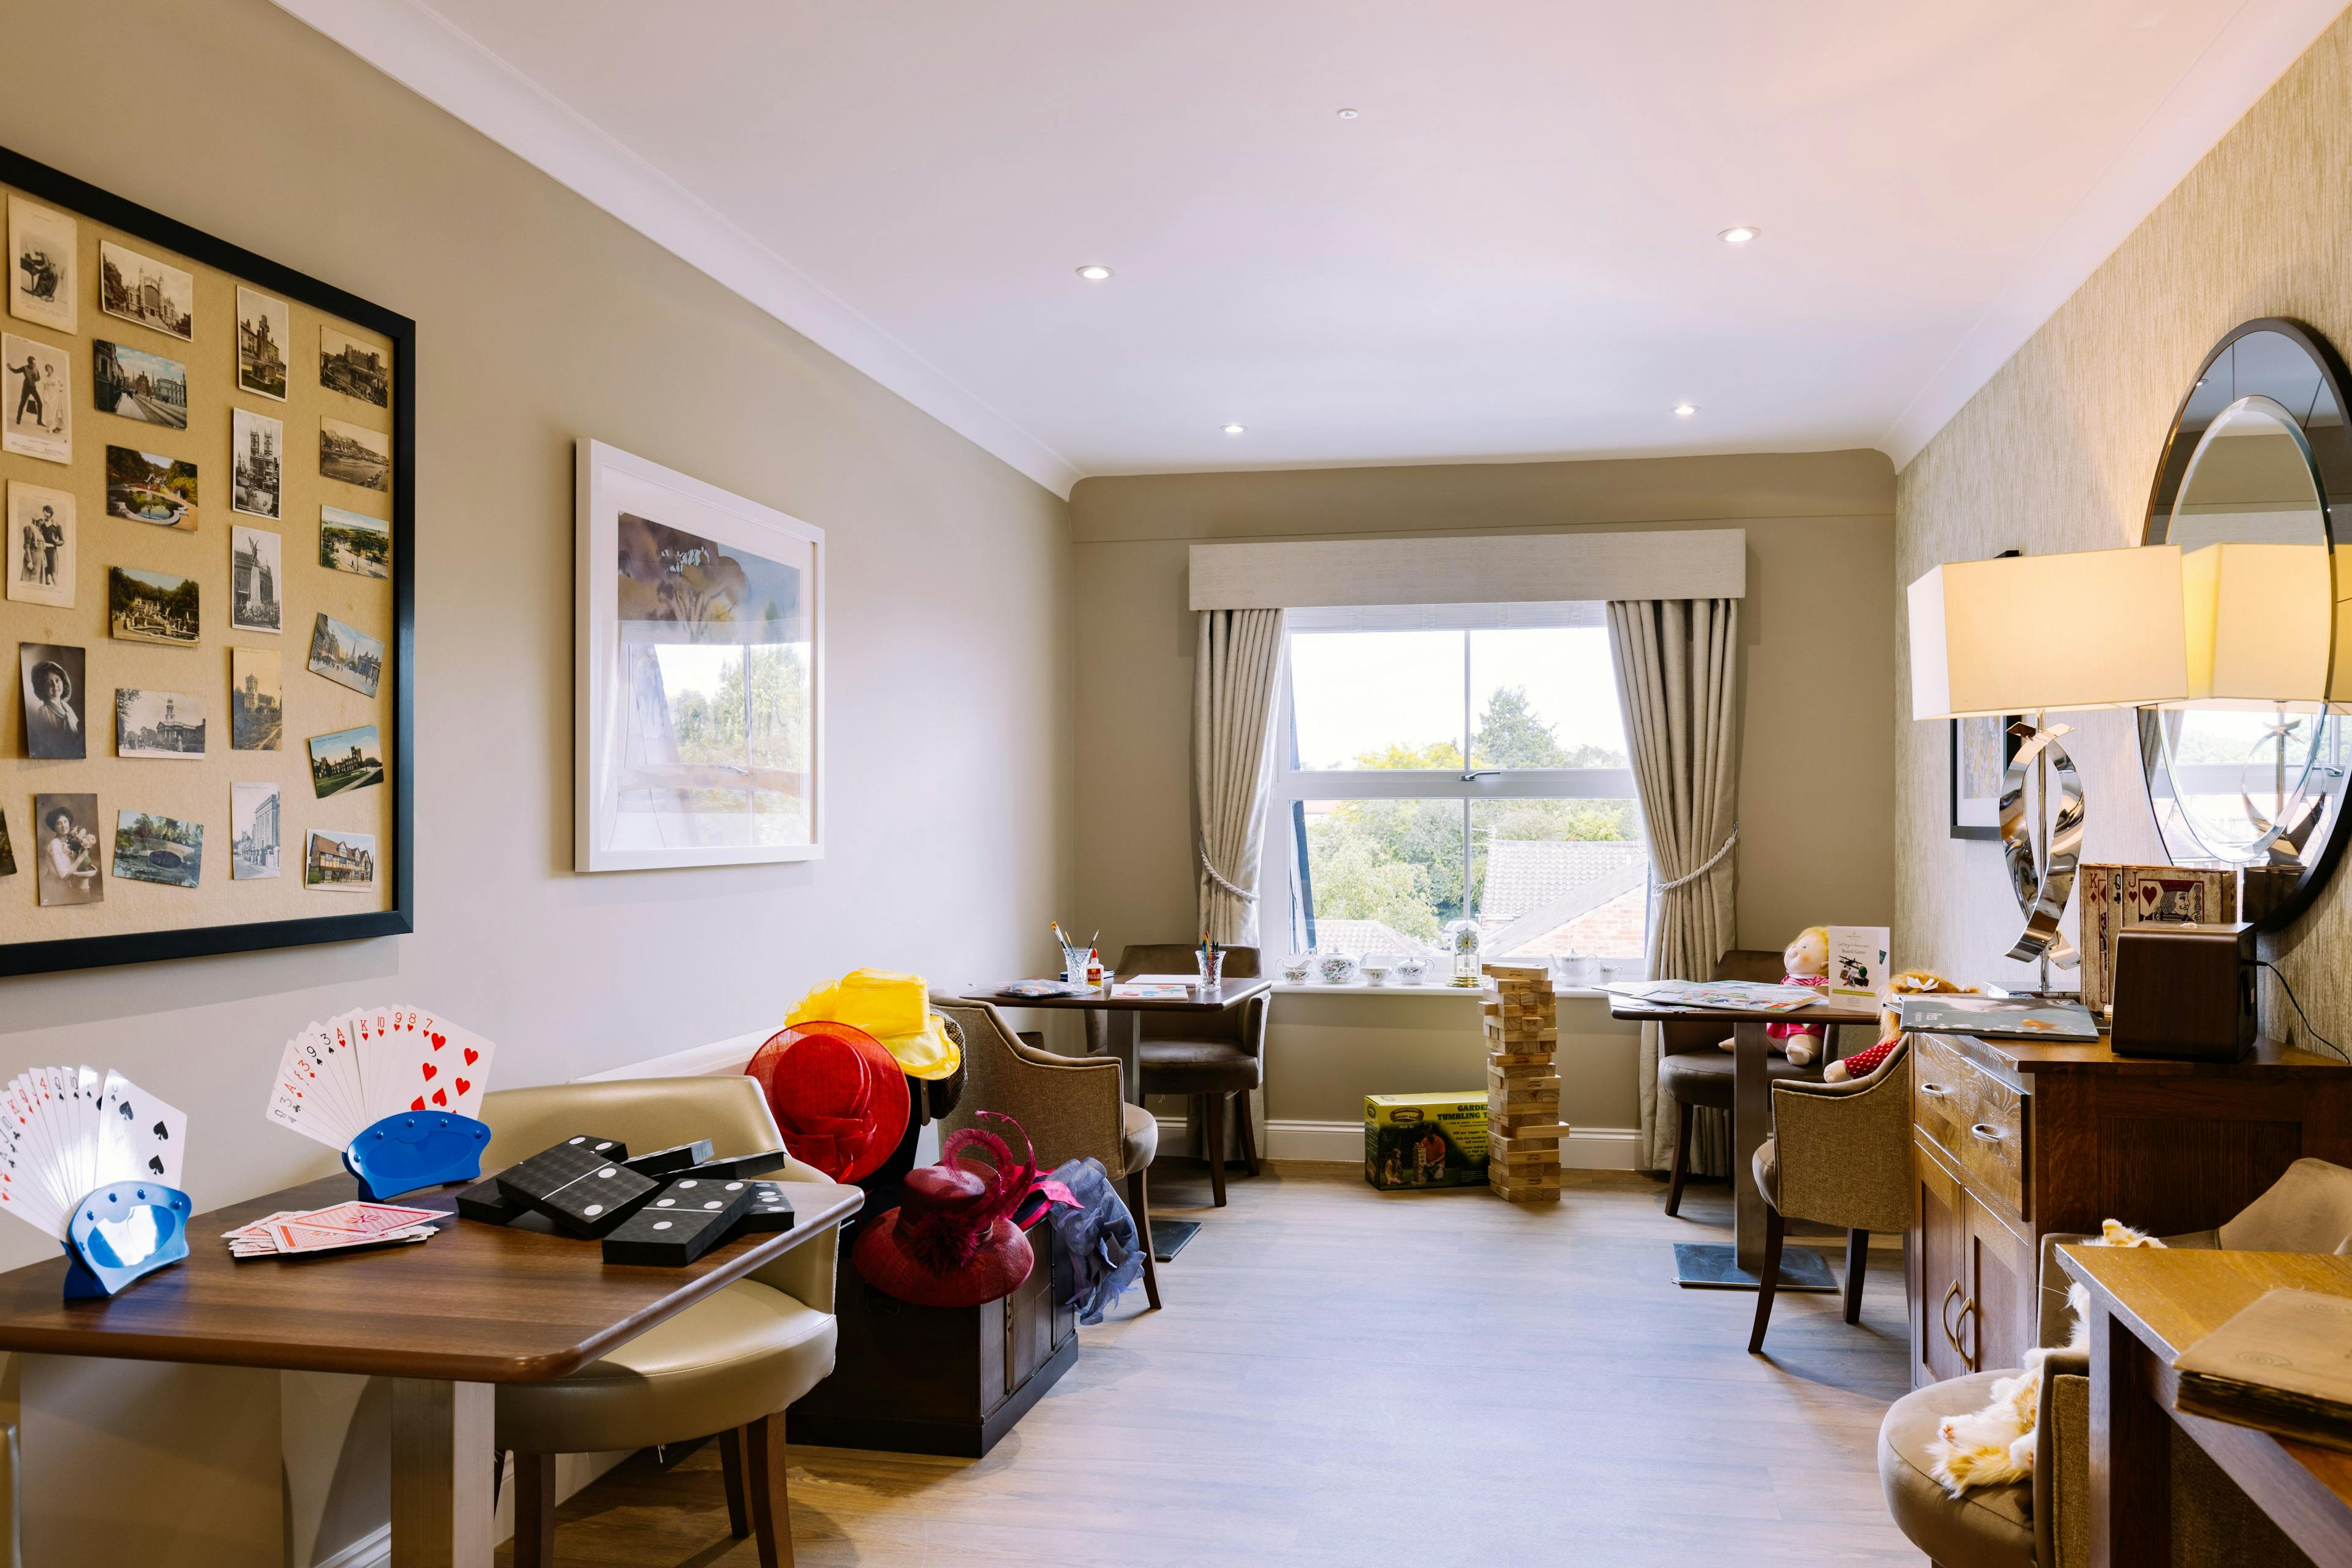 Activity Room of Ouse View Care Home in York, North Yorkshire